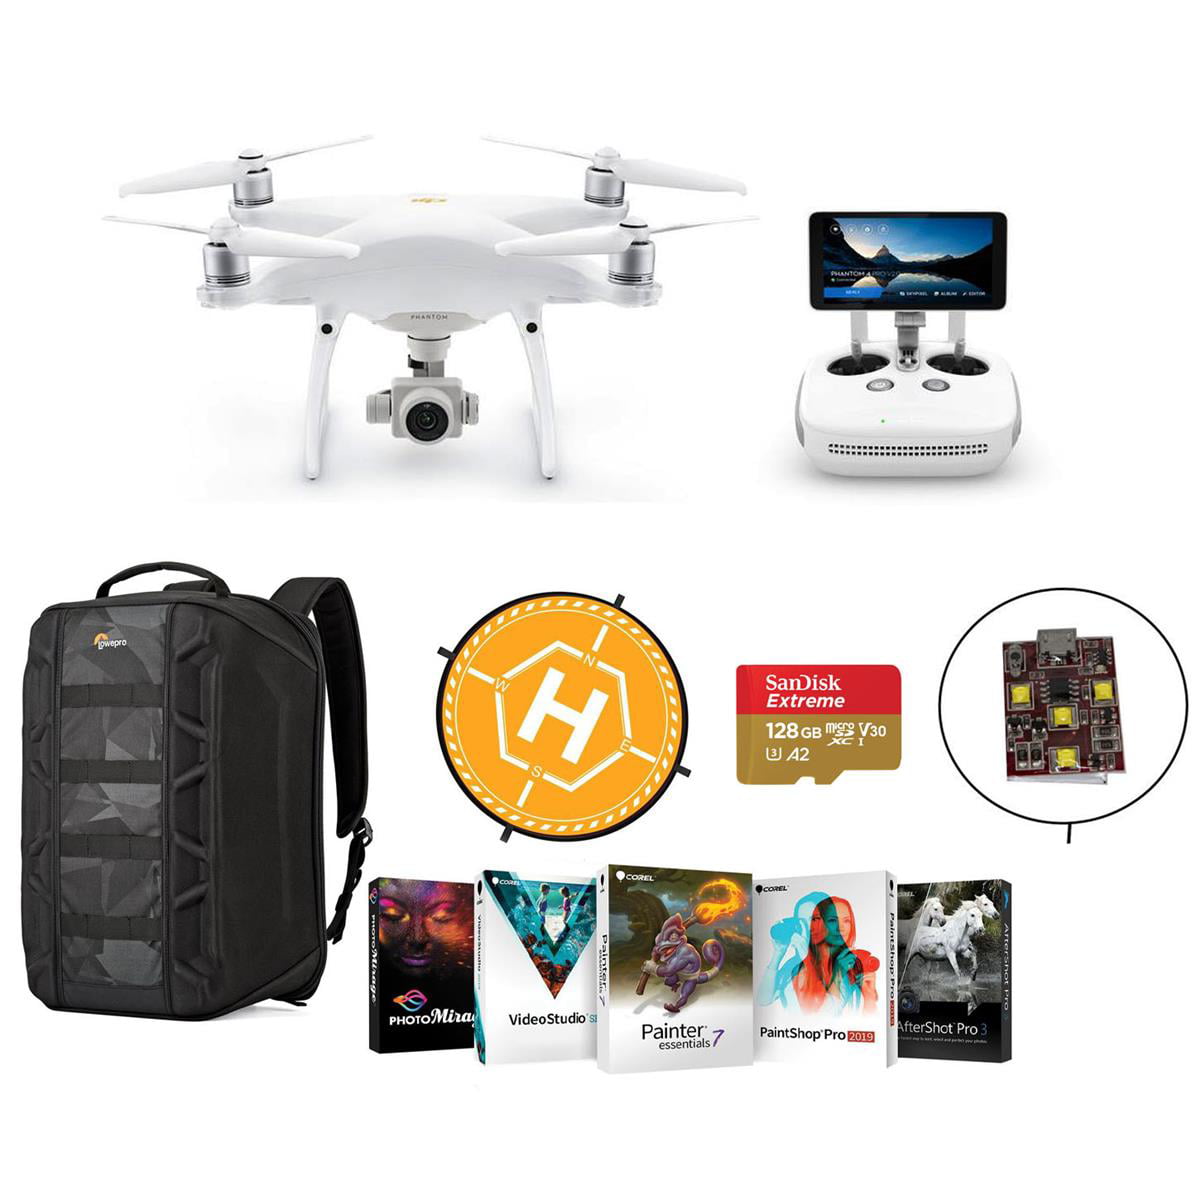 DJI Phantom 4 Pro+ V2.0 Quadcopter Drone with 5.5" FHD Screen Remote Controller - With Kit, MicroSDXC Card, Lowepro DroneGrd BP 400 Bac -